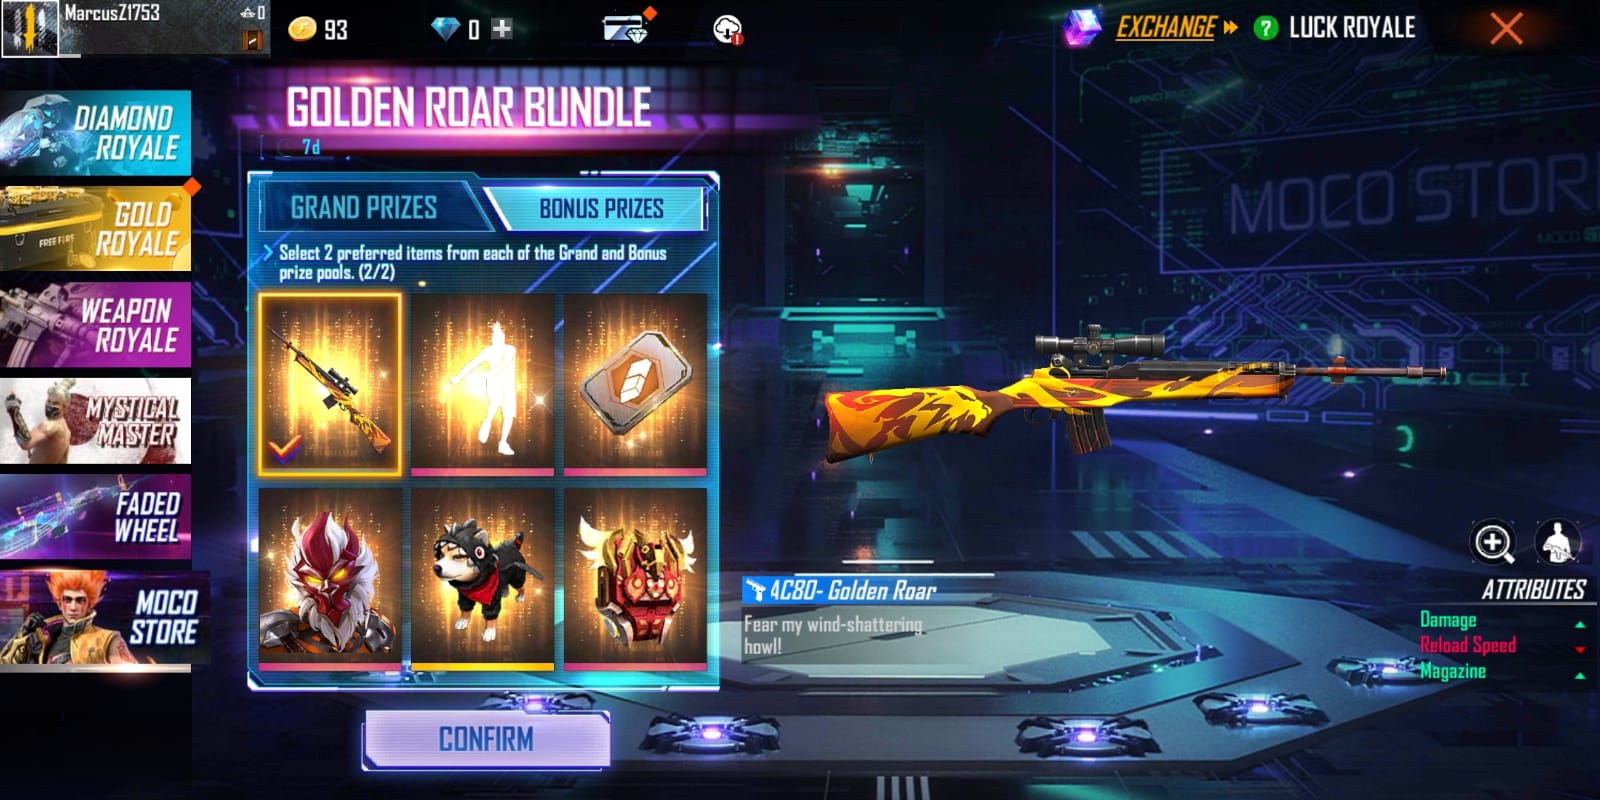 Garena Free Fire Moco Store Event: Check How to obtain the Golden Roar Bundle, AC80 Golden Road Skin, and many other items from the event